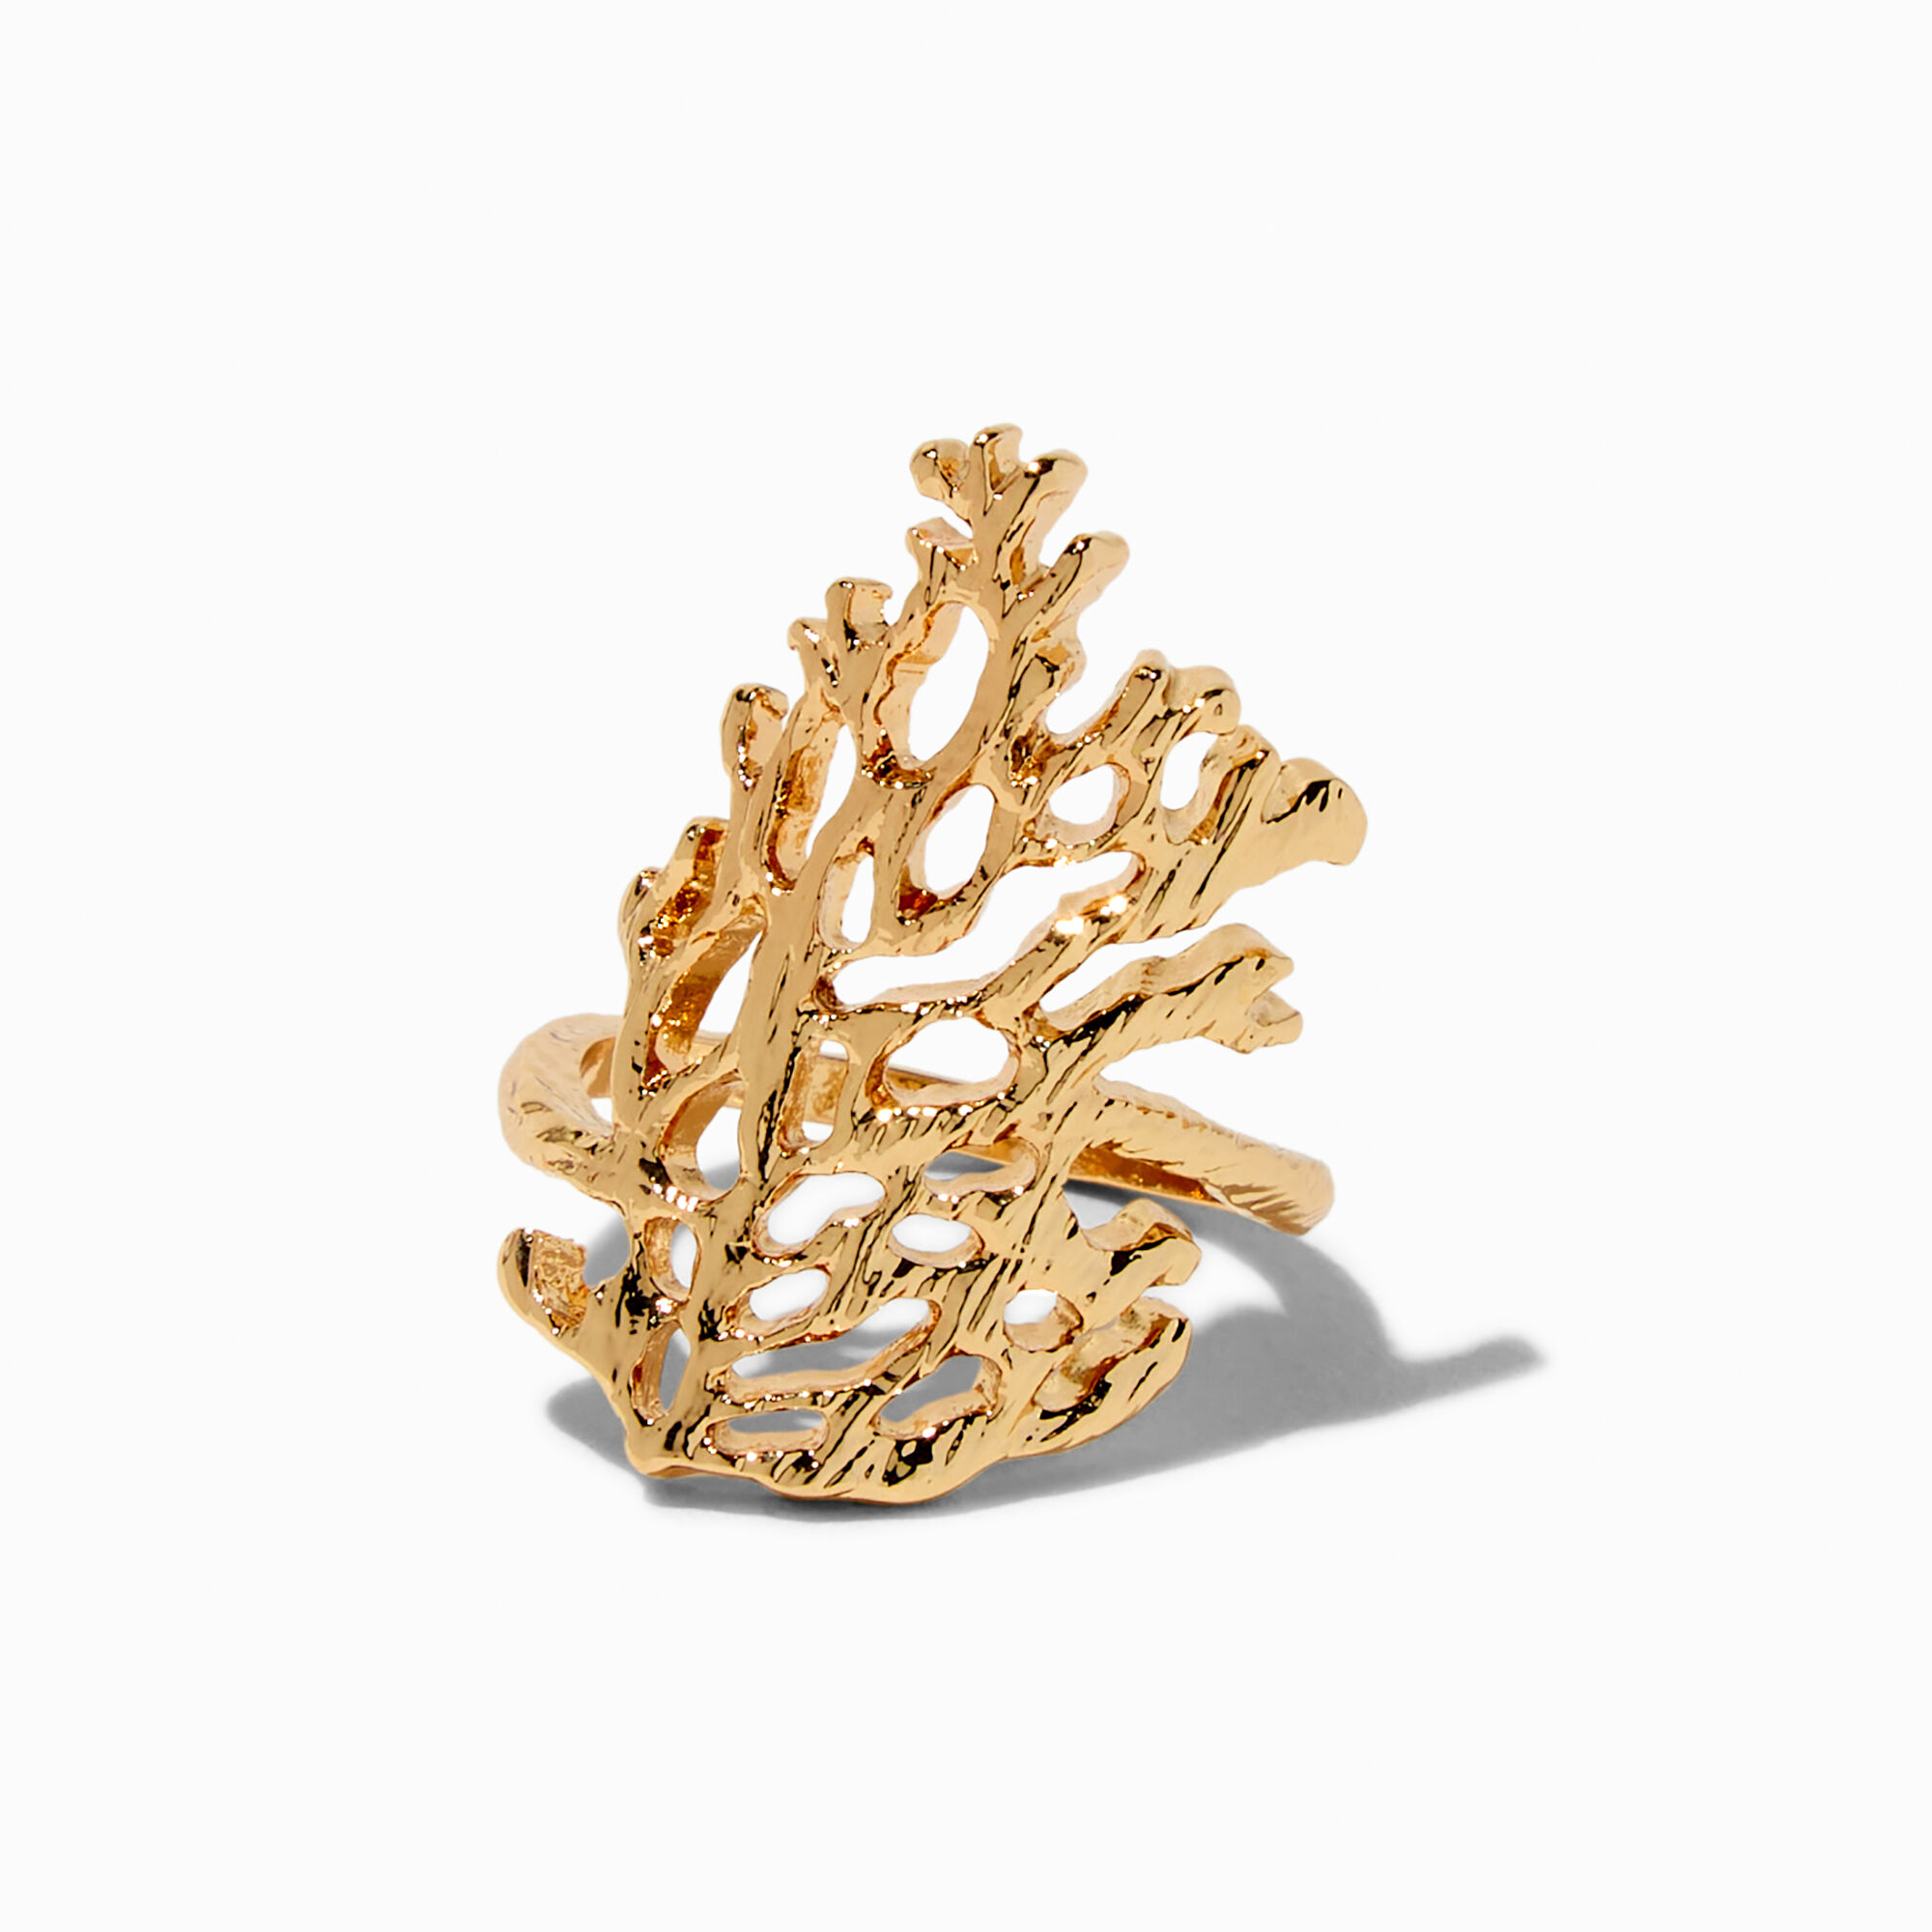 View Claires GoldTone Reef Ring Coral information